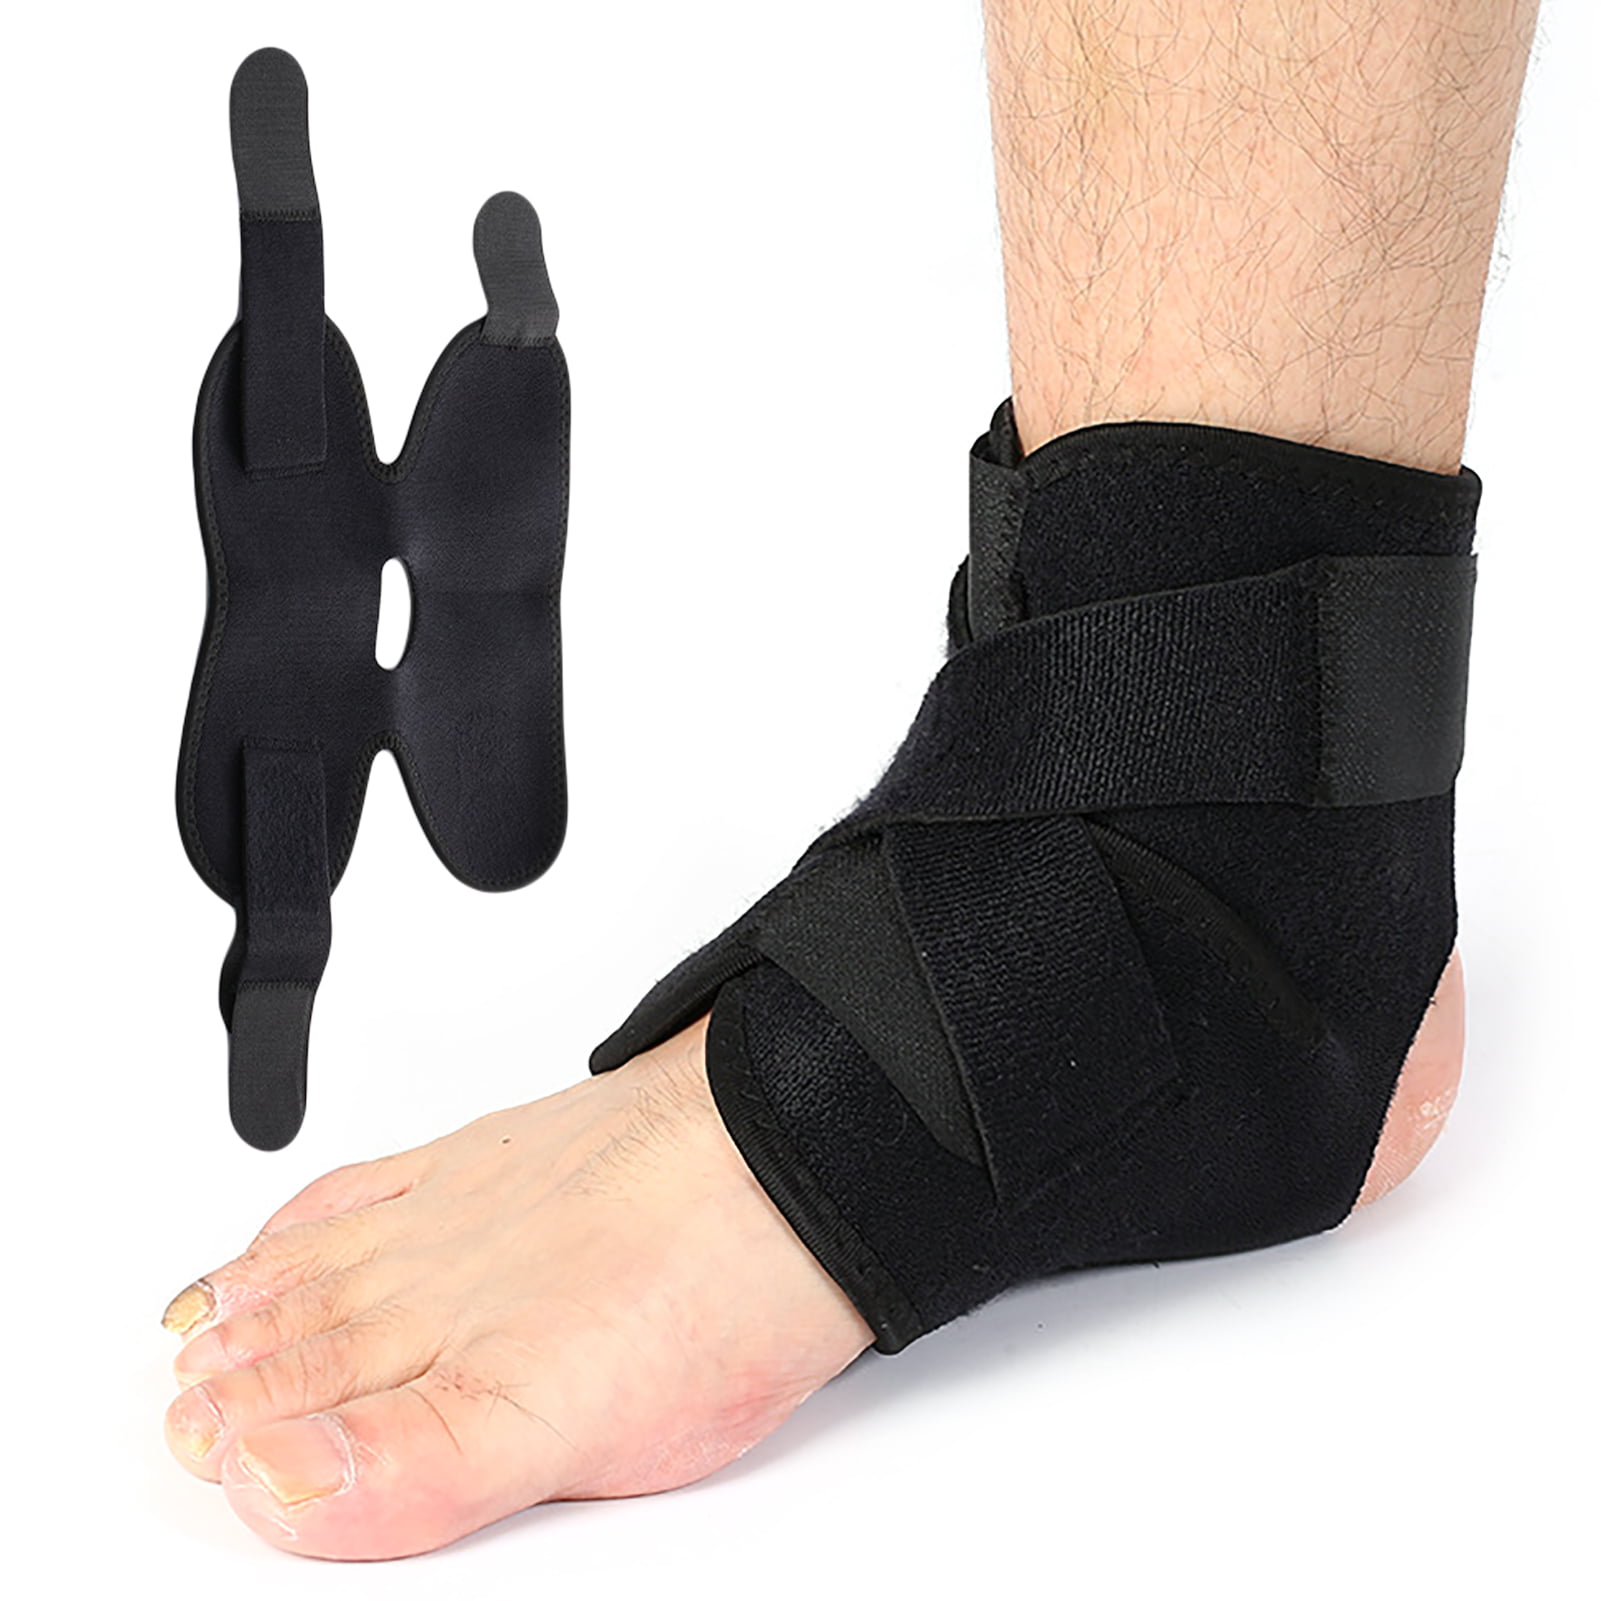 Tynor Ankle Brace|Buy Online at best price in India from Healthklin.com